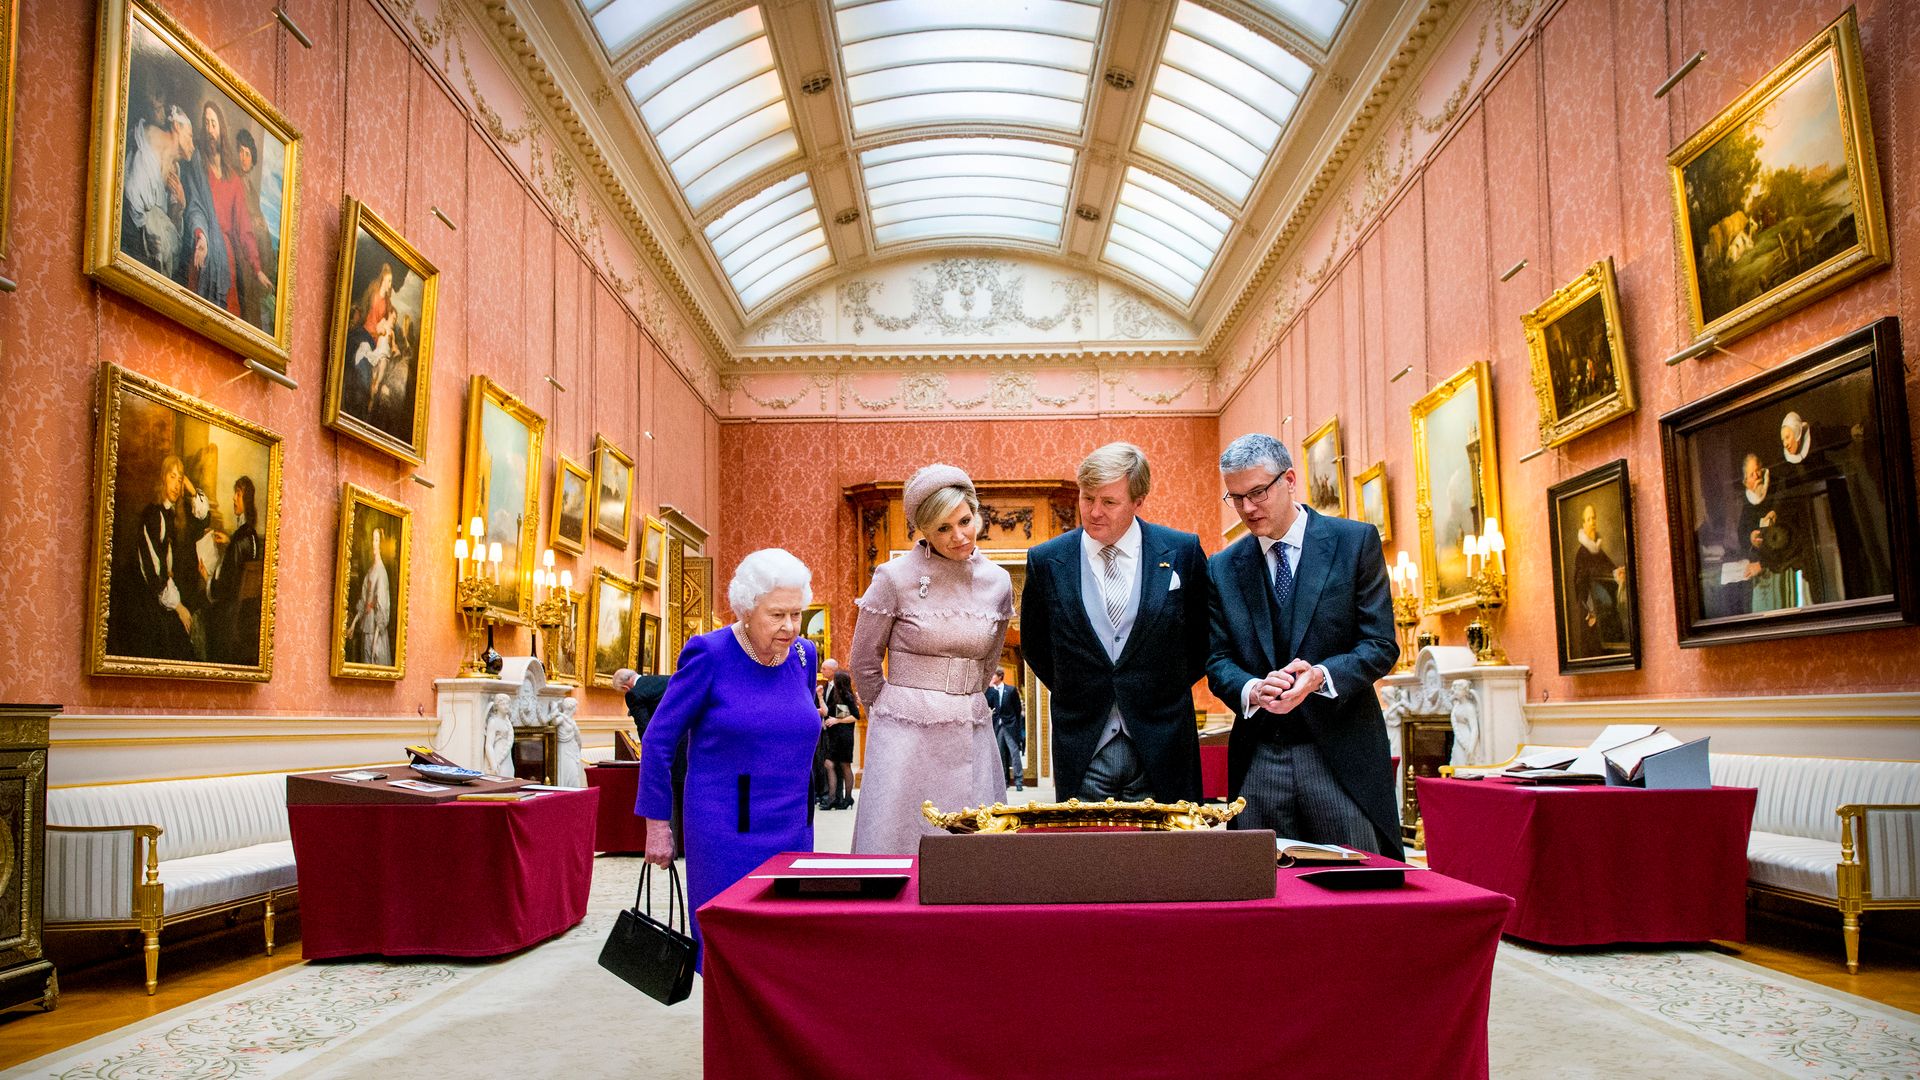 The Queen, Queen Maxima, King Willem-Alexander and a man inspecting art at Buckingham Palace's gallery